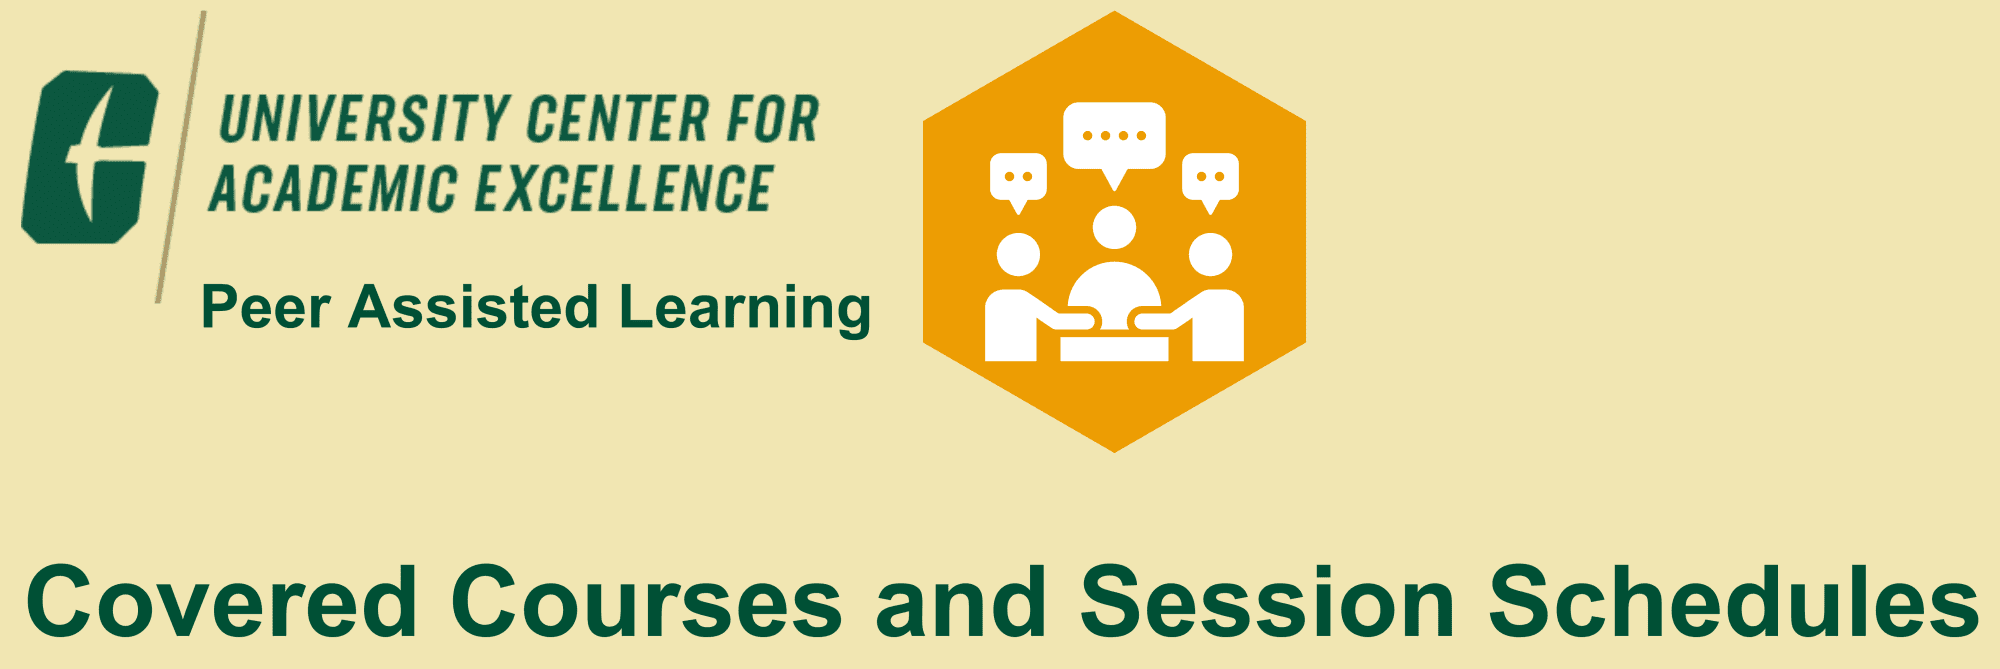 University center for Academic Excellence Peer Assisted Learning Covered Courses and Session schedule